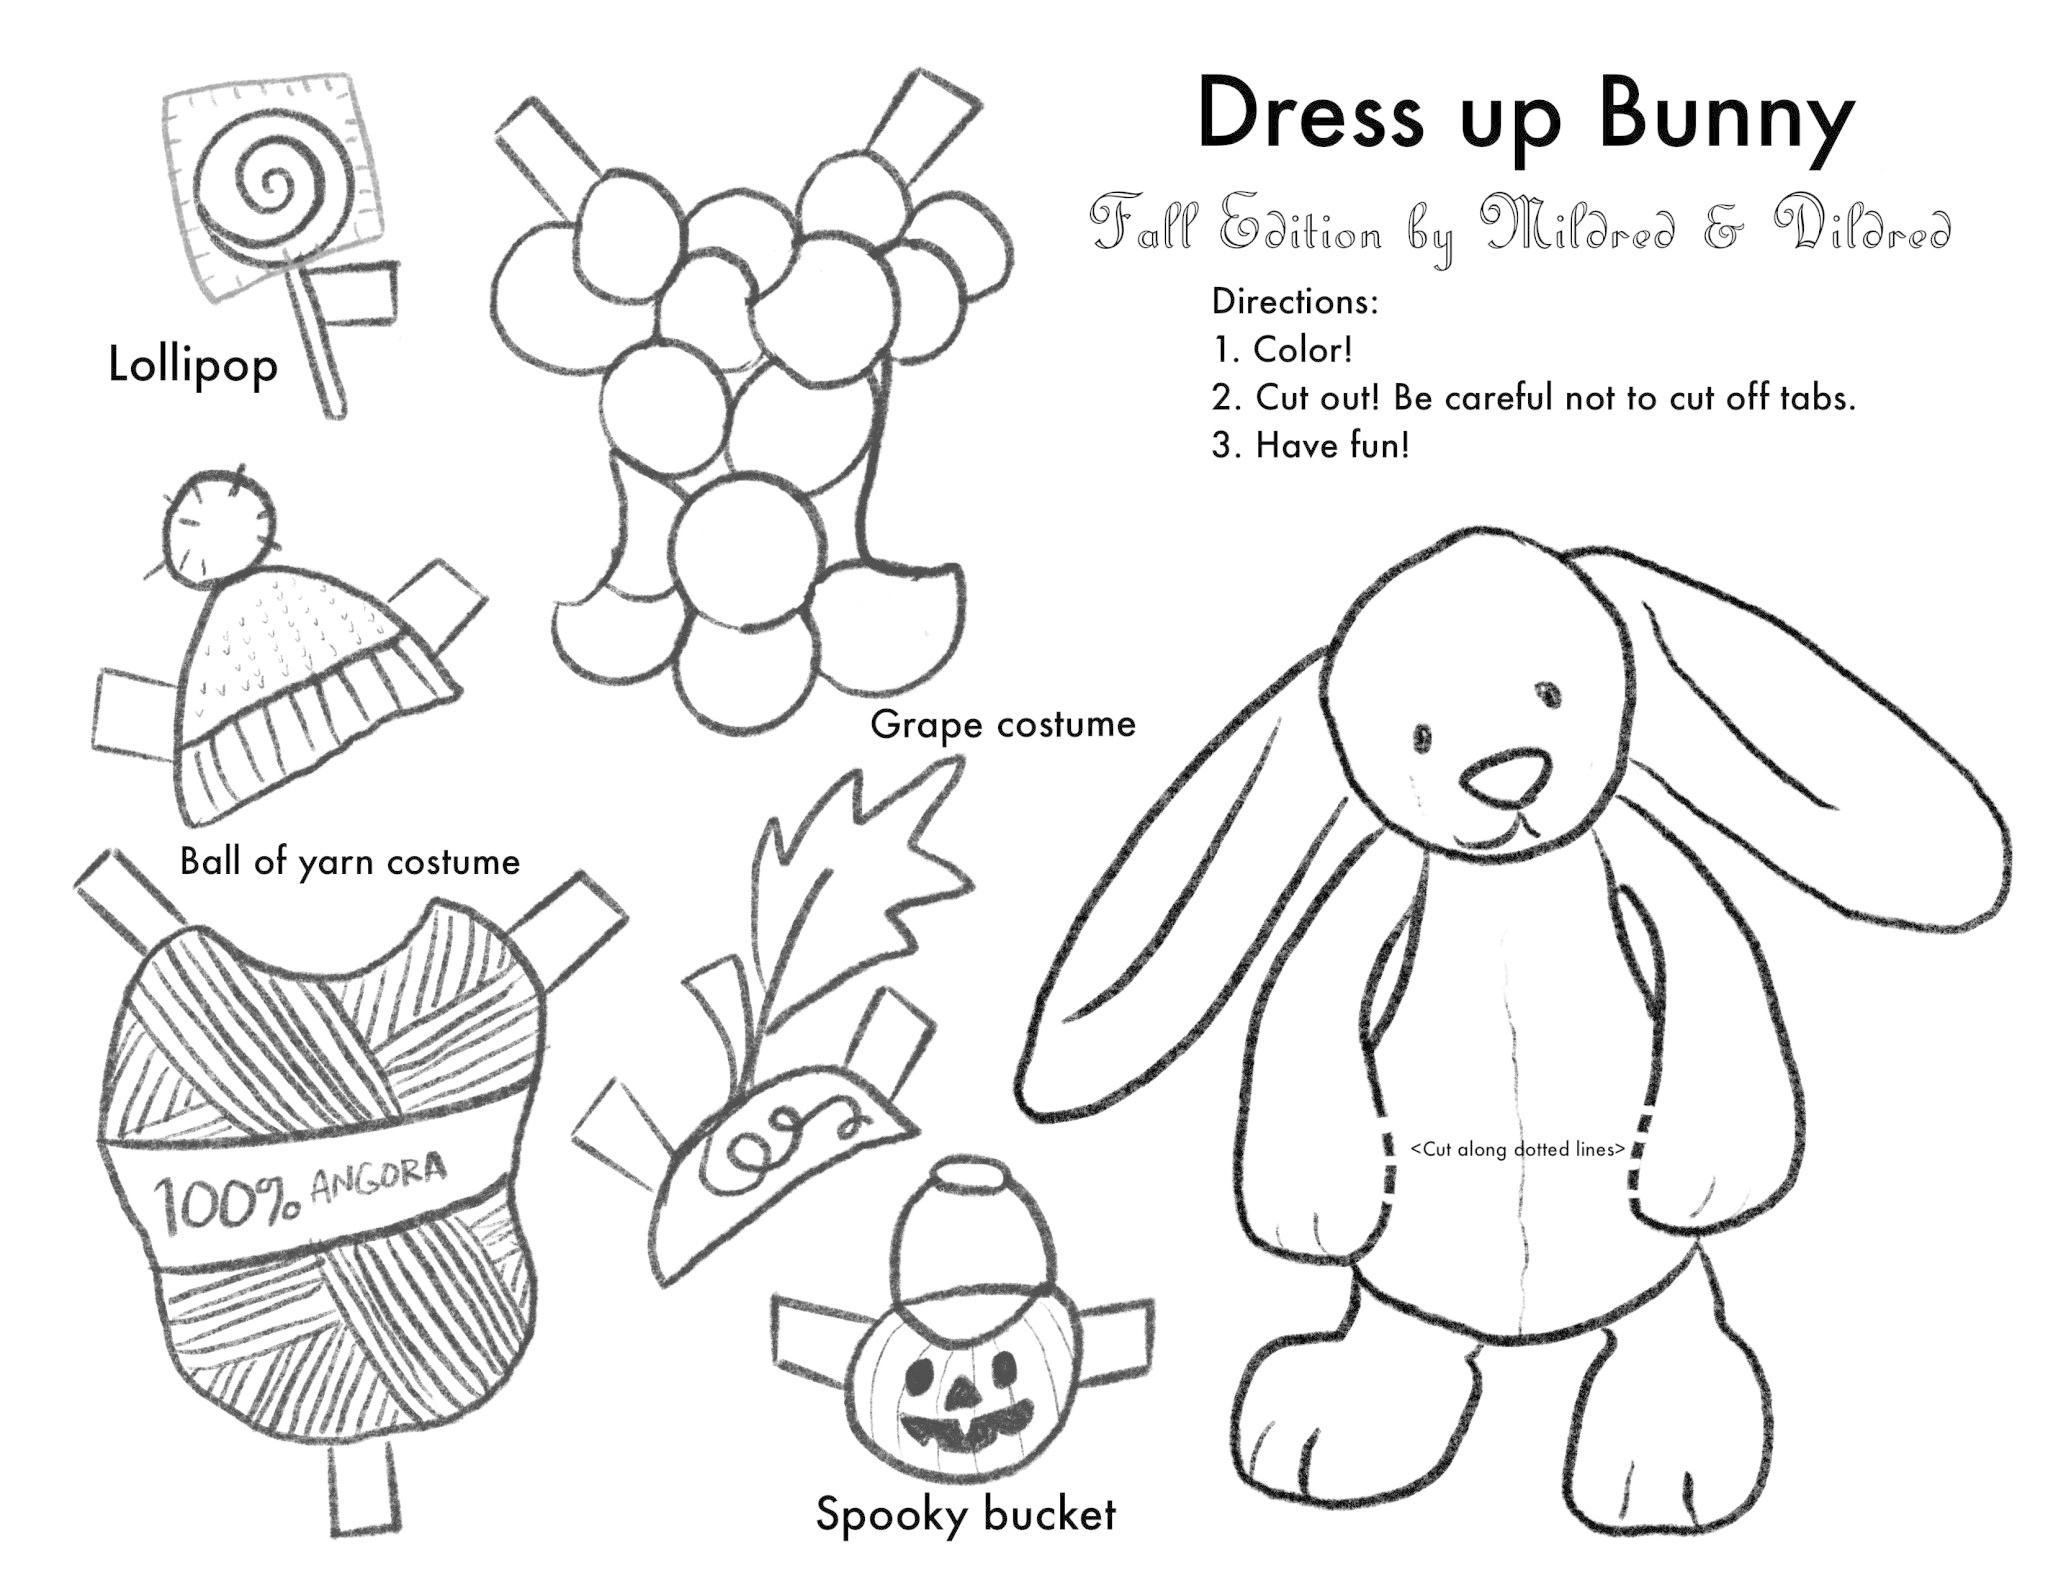 Dress up Bunny - Fall Edition - Mildred & Dildred